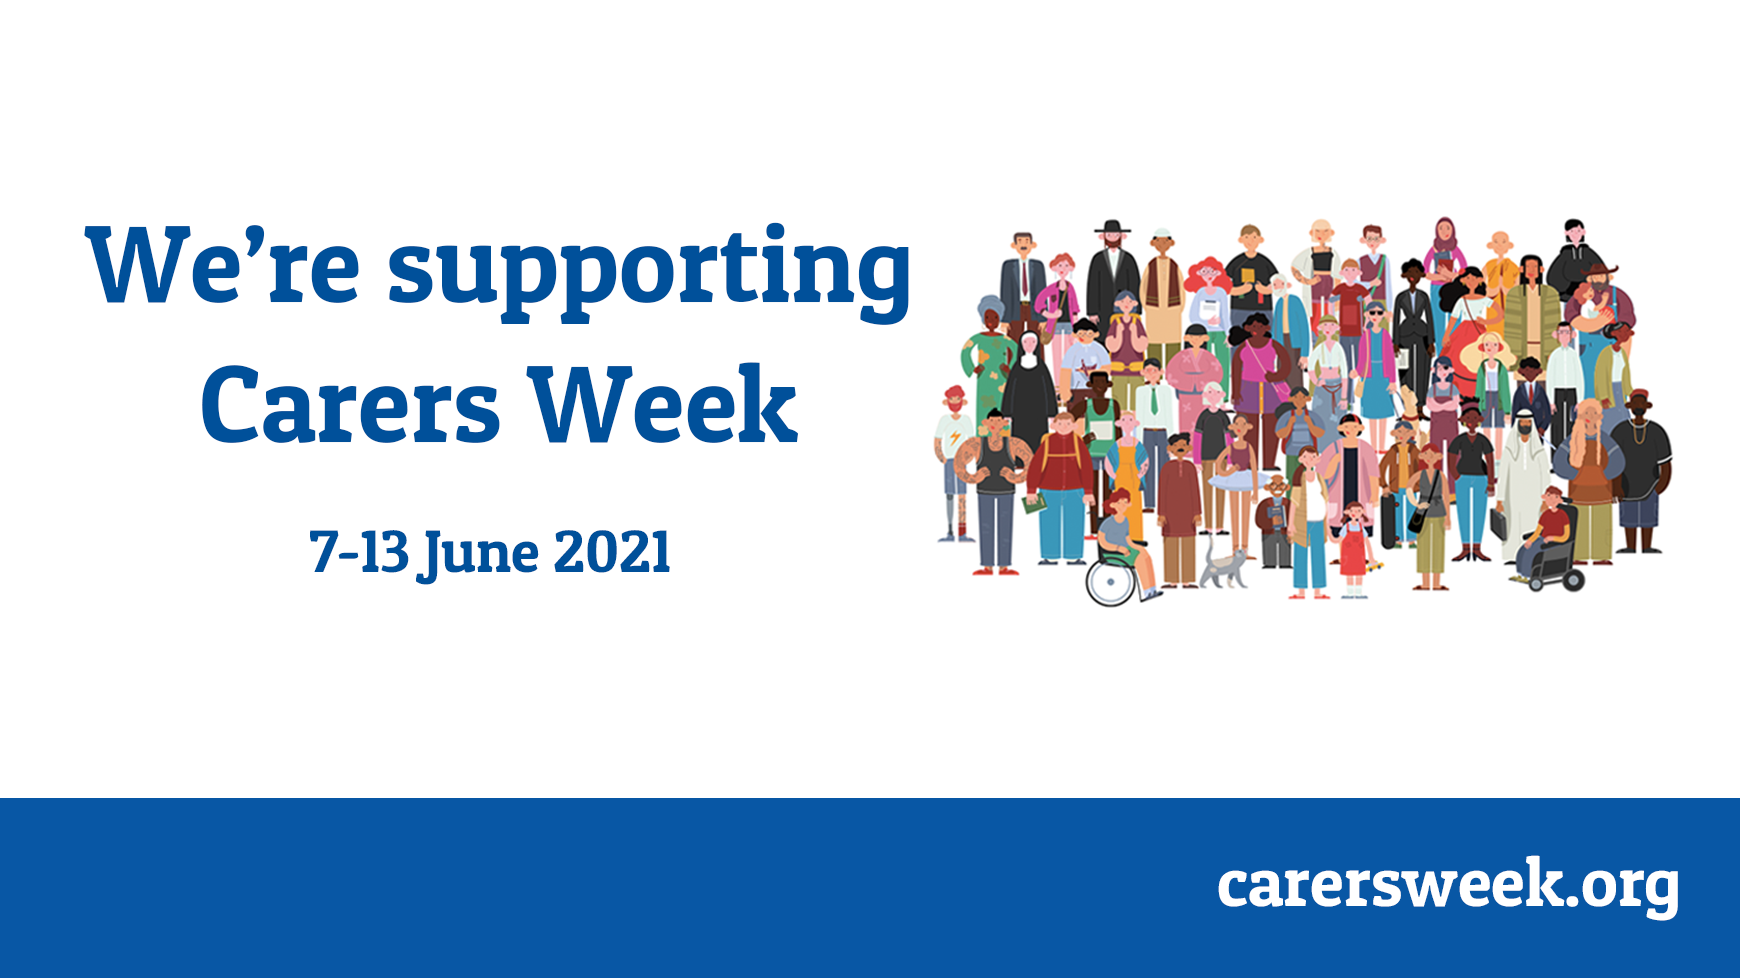 We're supporting Carers Week 7-13 June 2021